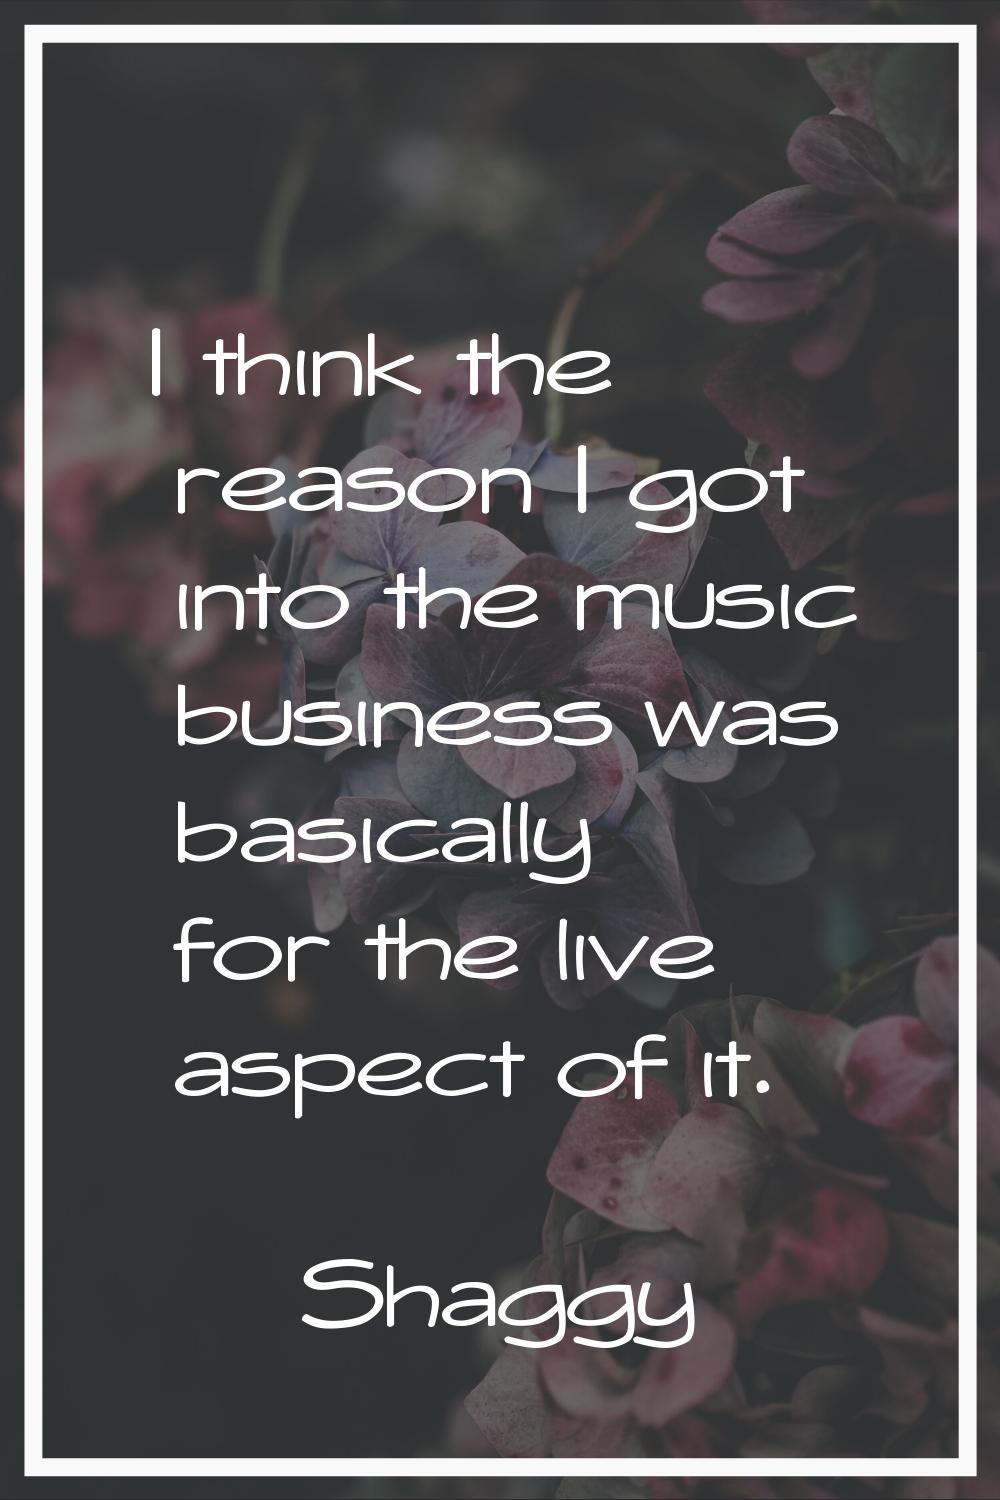 I think the reason I got into the music business was basically for the live aspect of it.